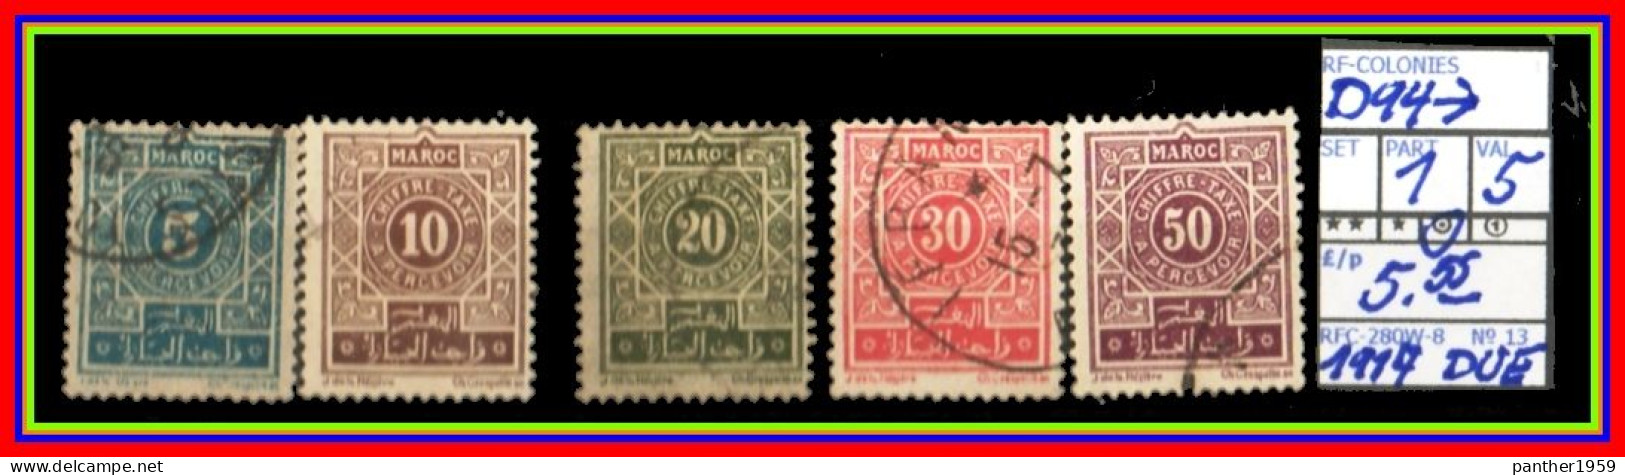 EUROPE>FRANCE COLONIES# MOROCCO# #DEFINITIVES#PARTIAL SET# MNH/**MH*#USED (RFC-280W-8) (13) - Timbres-taxe